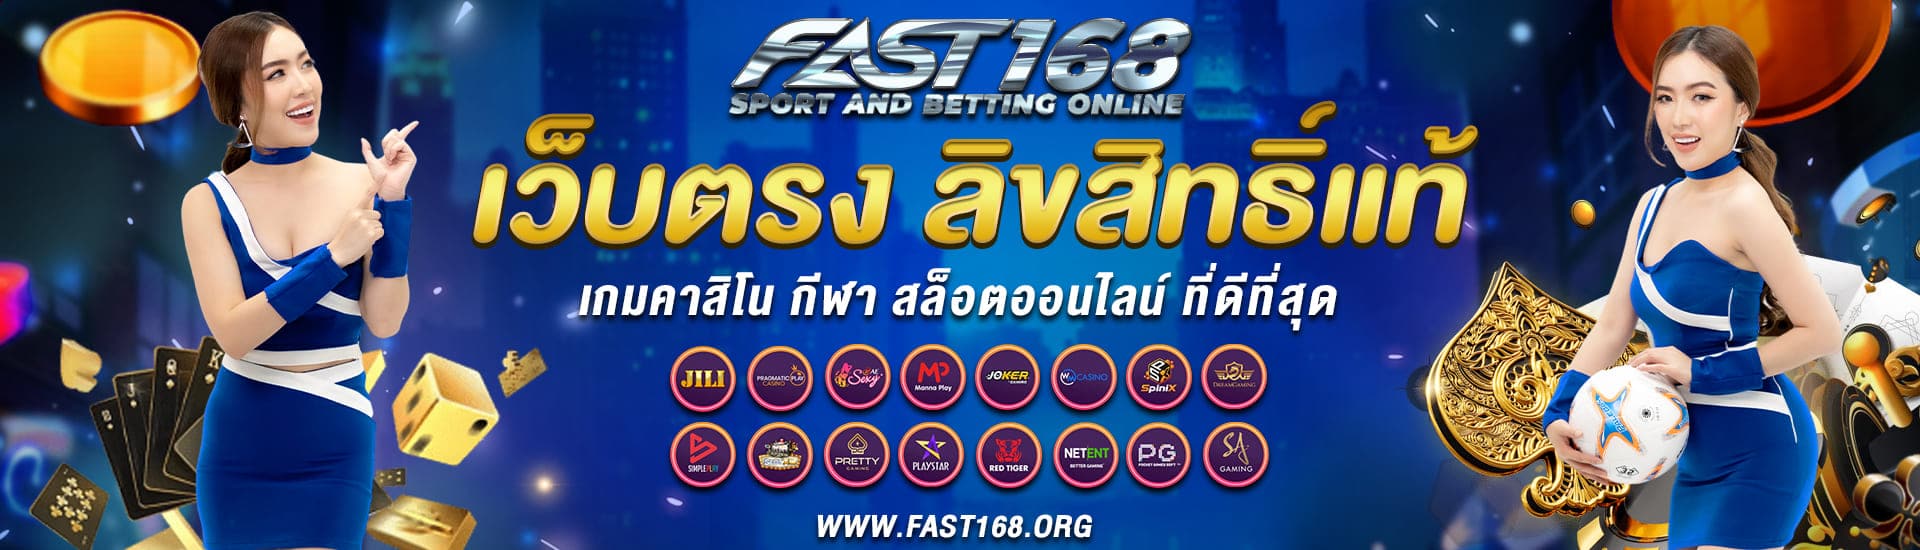 FAST168-Banner-002